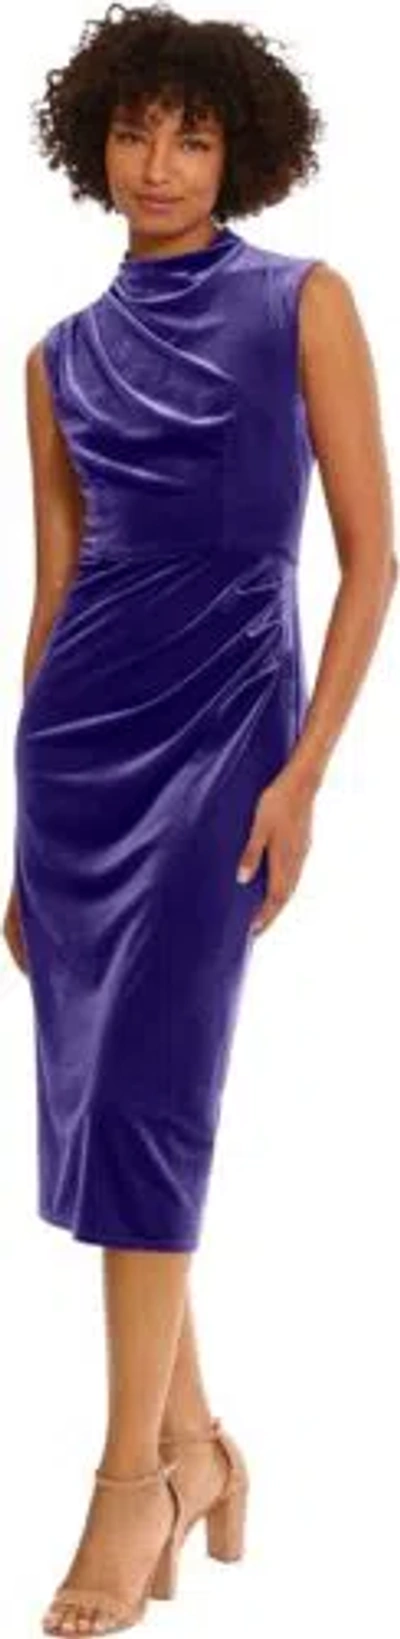 Pre-owned Donna Morgan Women's Sleek And Sophisticated Stretch Velvet Midi Event... In Deep Wisteria